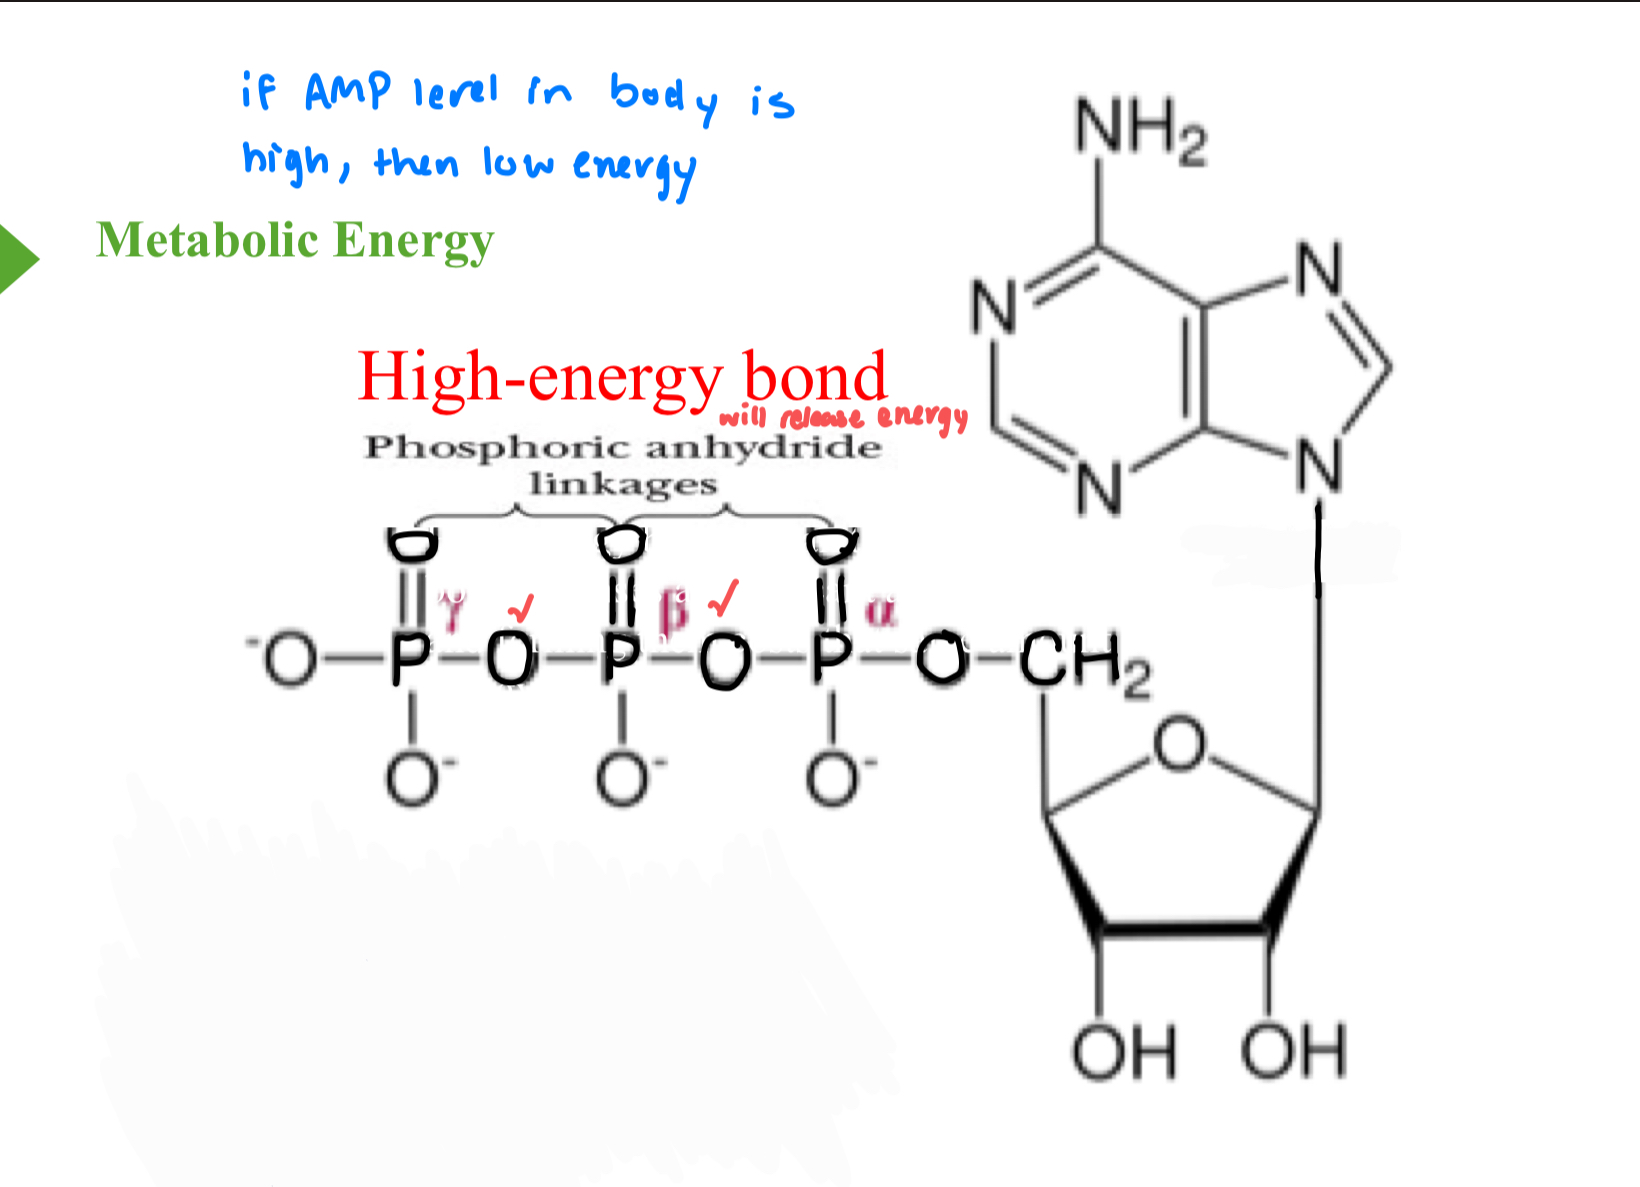 <p>What do phosphoric anhydride linkages being high-energy bonds mean for the amount of energy that is released when those linkages are broken?</p>